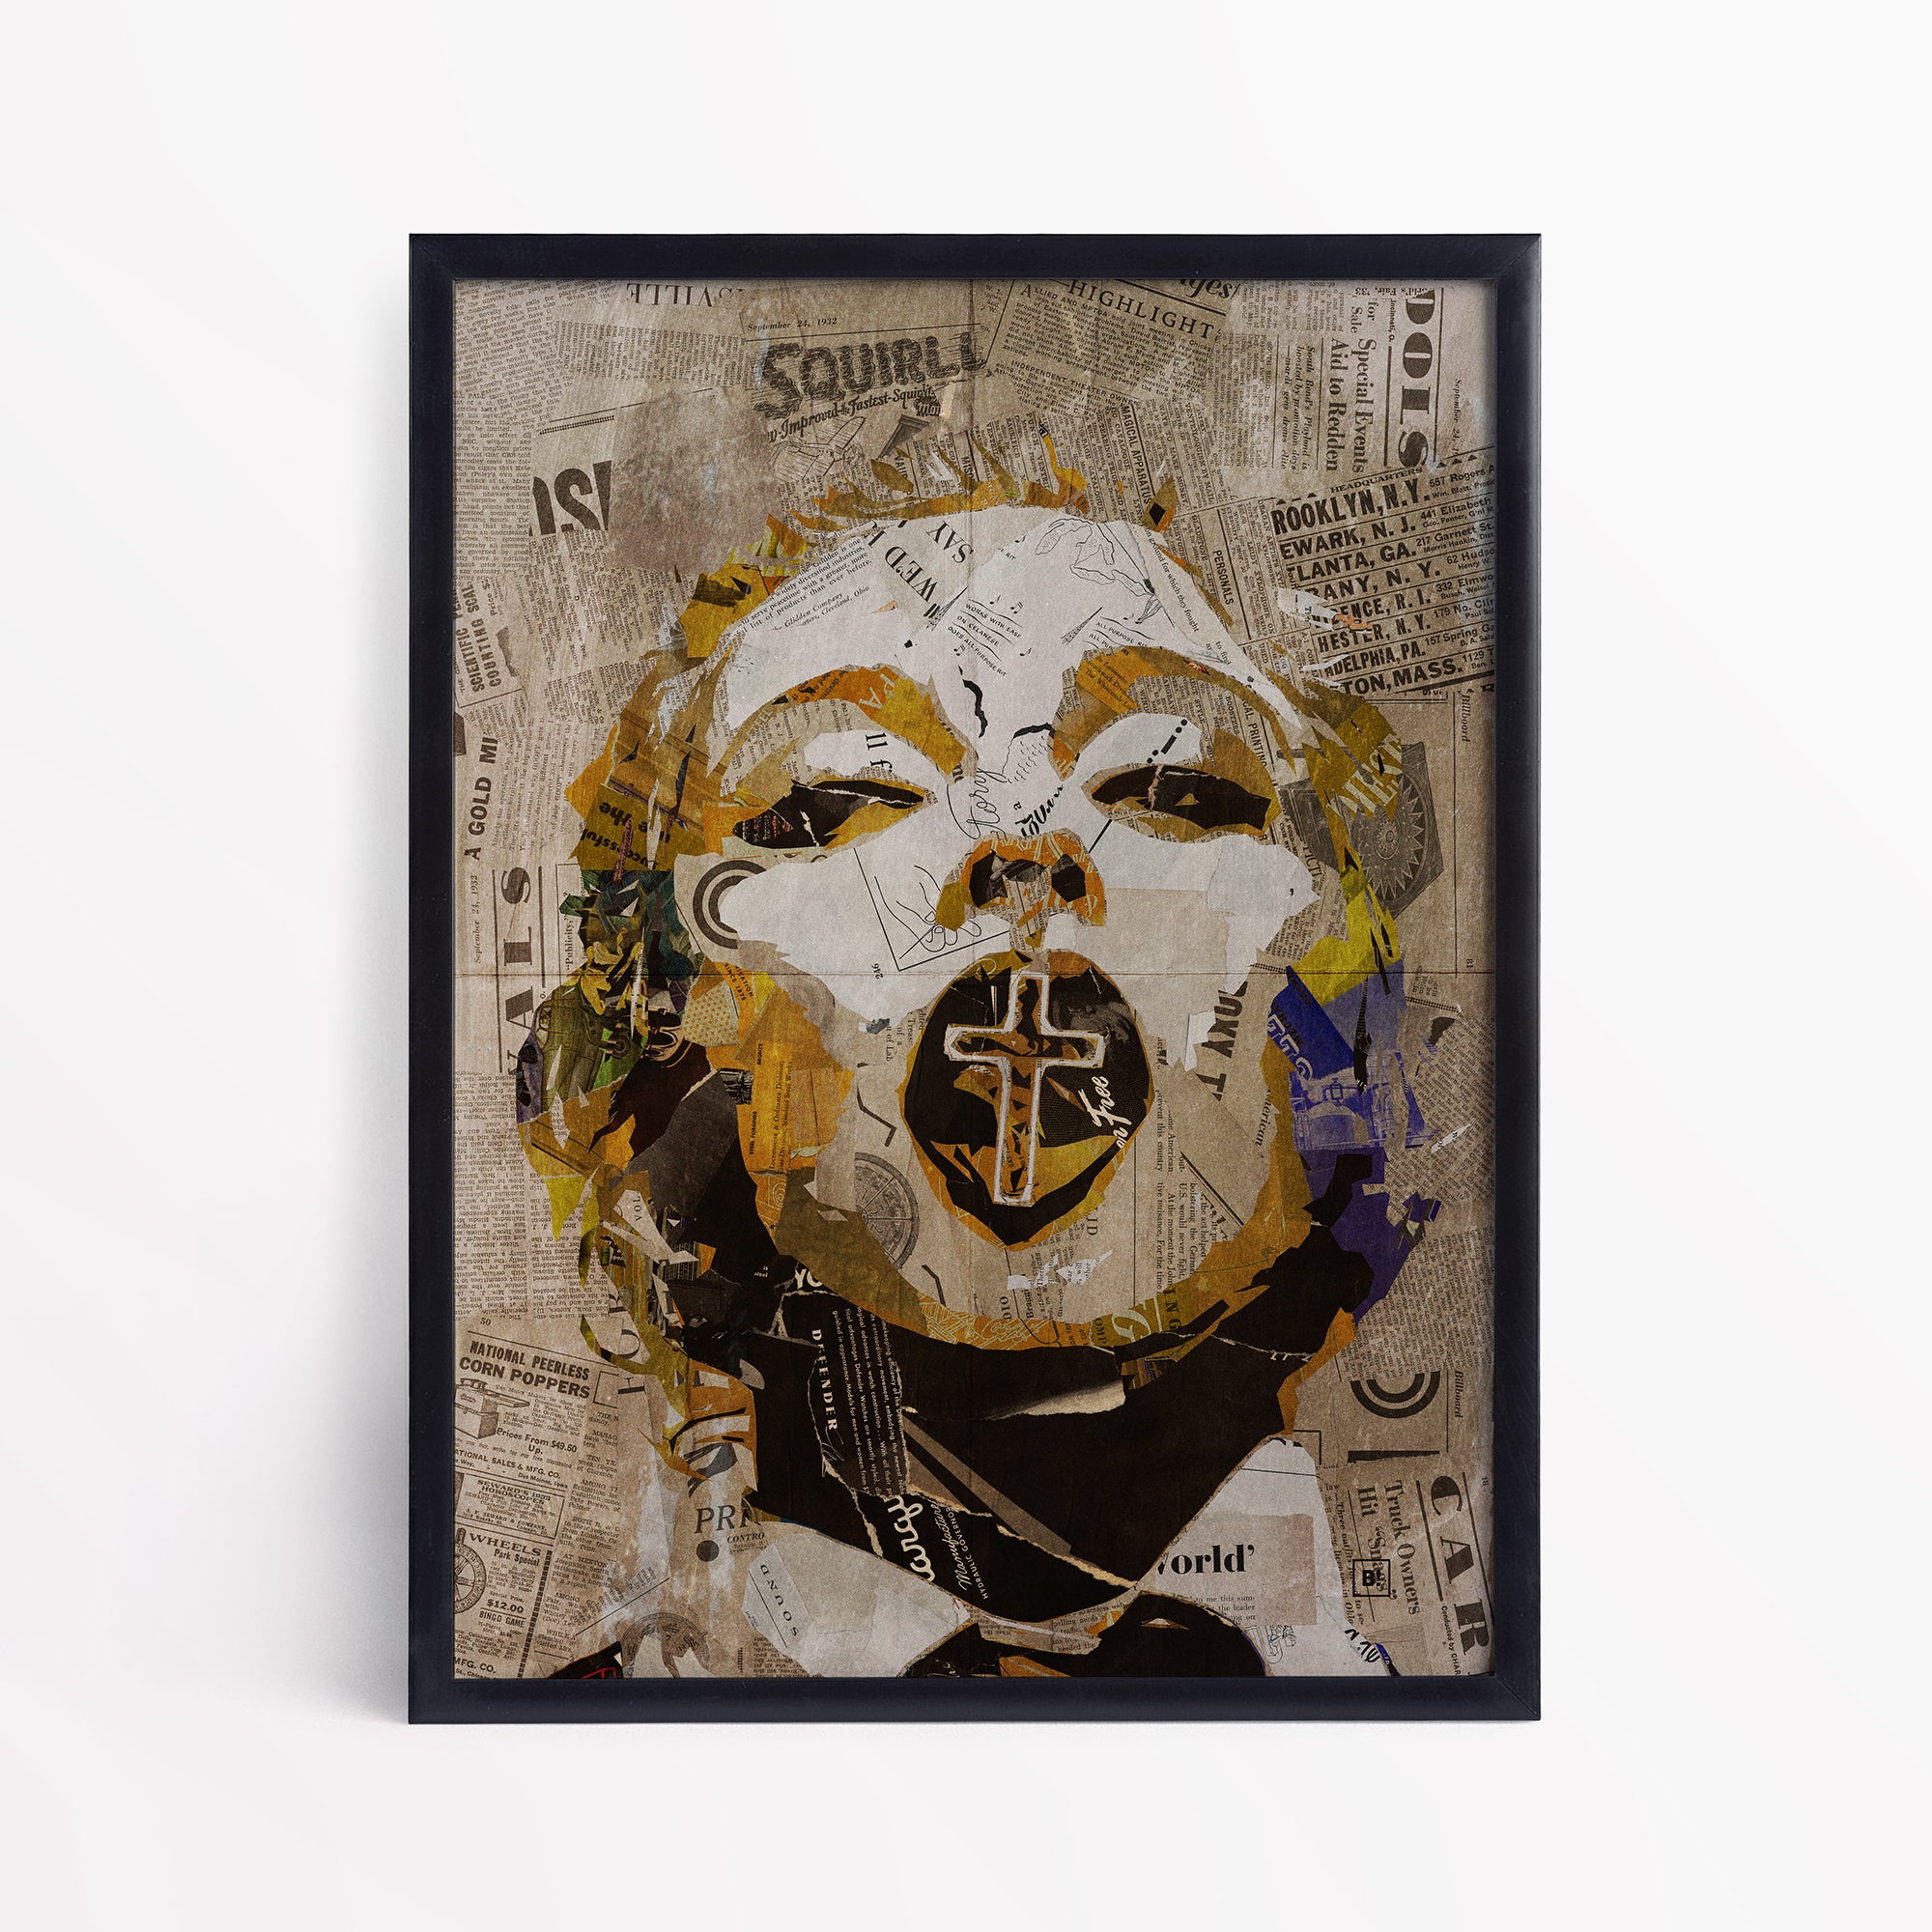 Be inspired by our iconic collage portrait art print of Madonna. This artwork has been printed using the giclée process on archival acid-free paper and is presented in a sleek black frame, showcasing its timeless beauty in every detail.